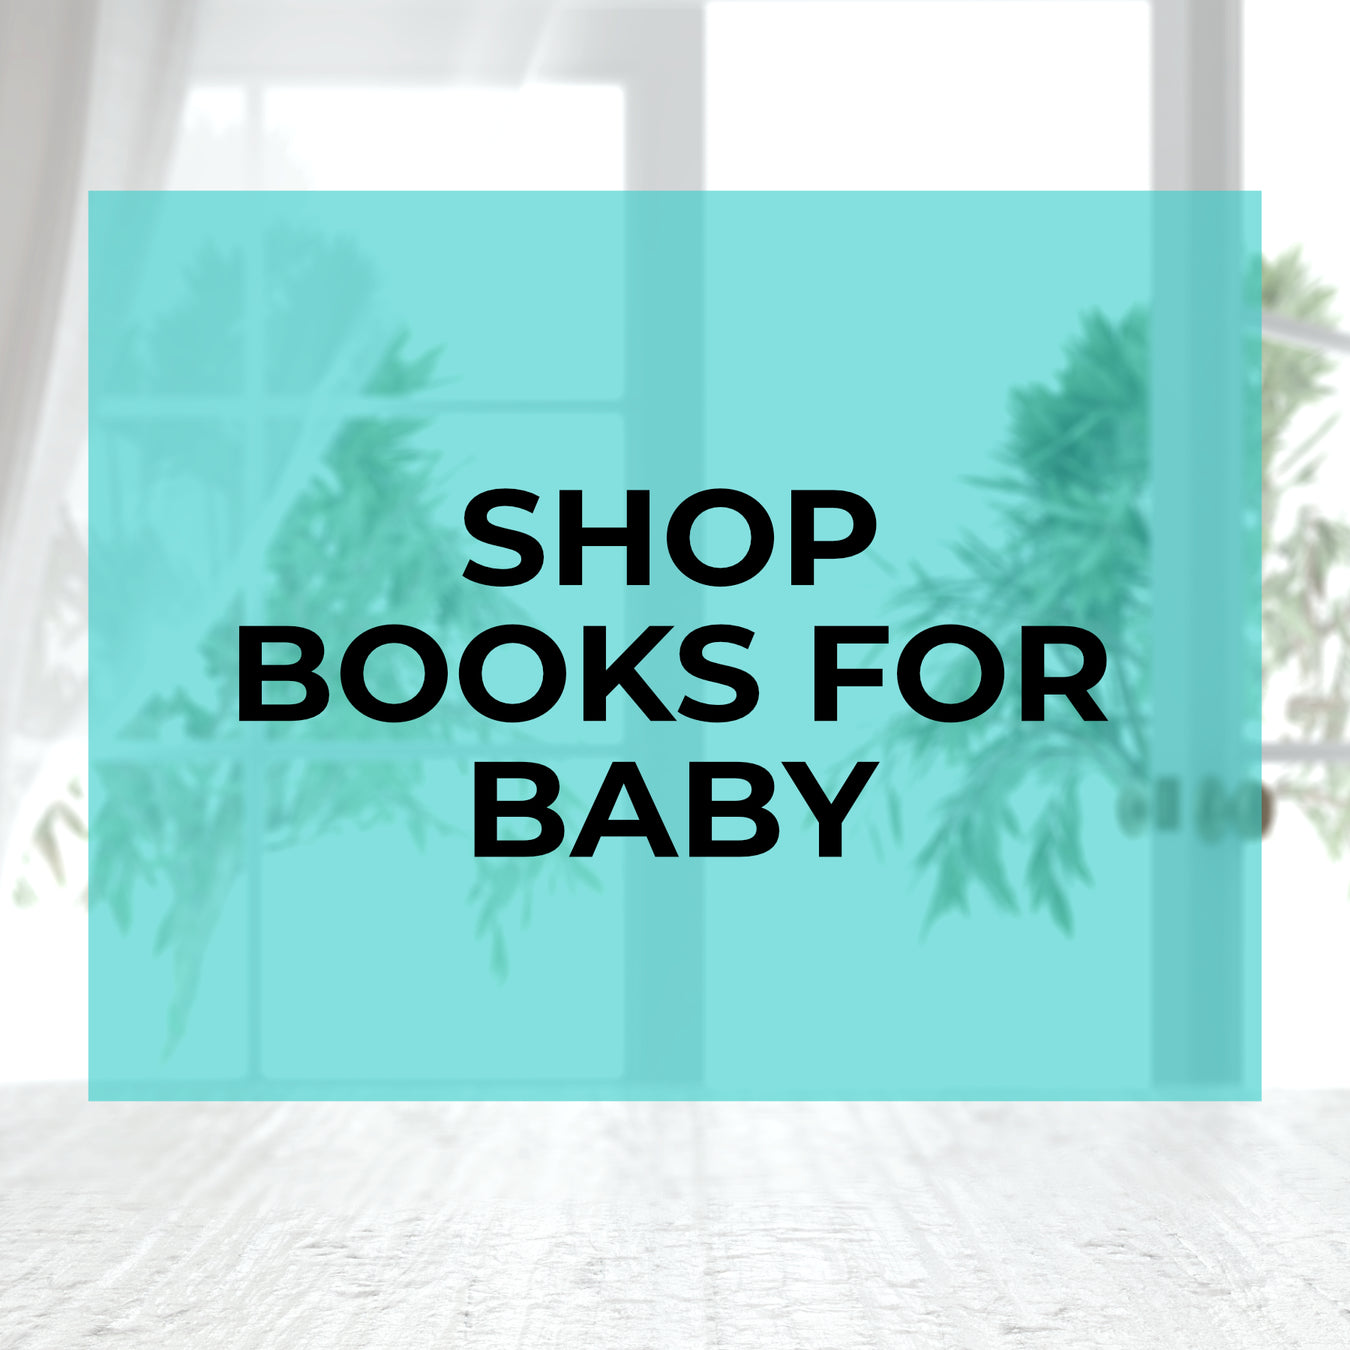 Books for Baby